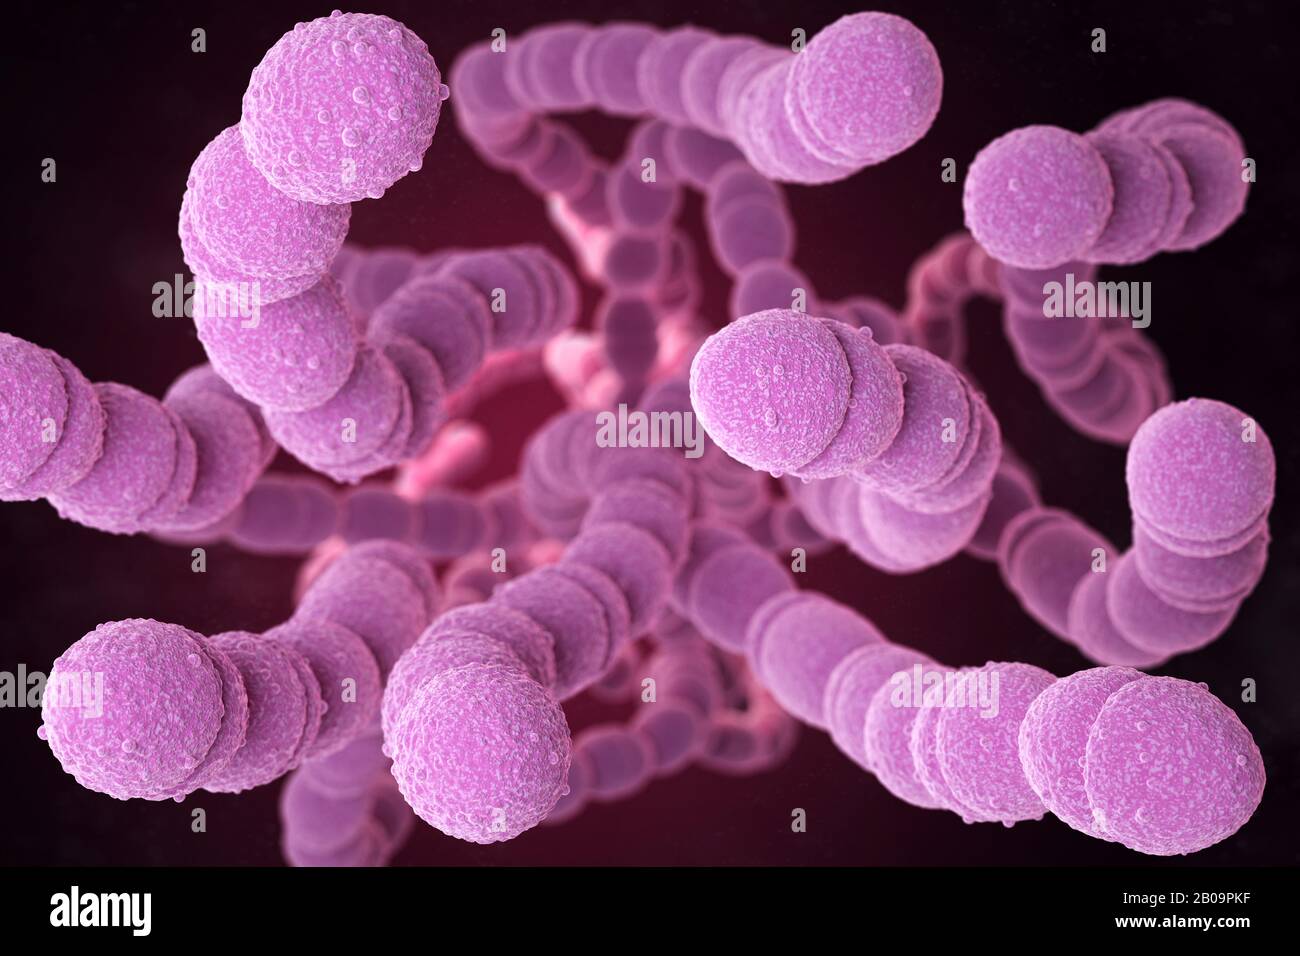 Streptococcus pneumoniae, or pneumococcus, is Gram-positive coccus shaped pathogenic bacteria which causes many types of pneumococcal infections in ad Stock Photo